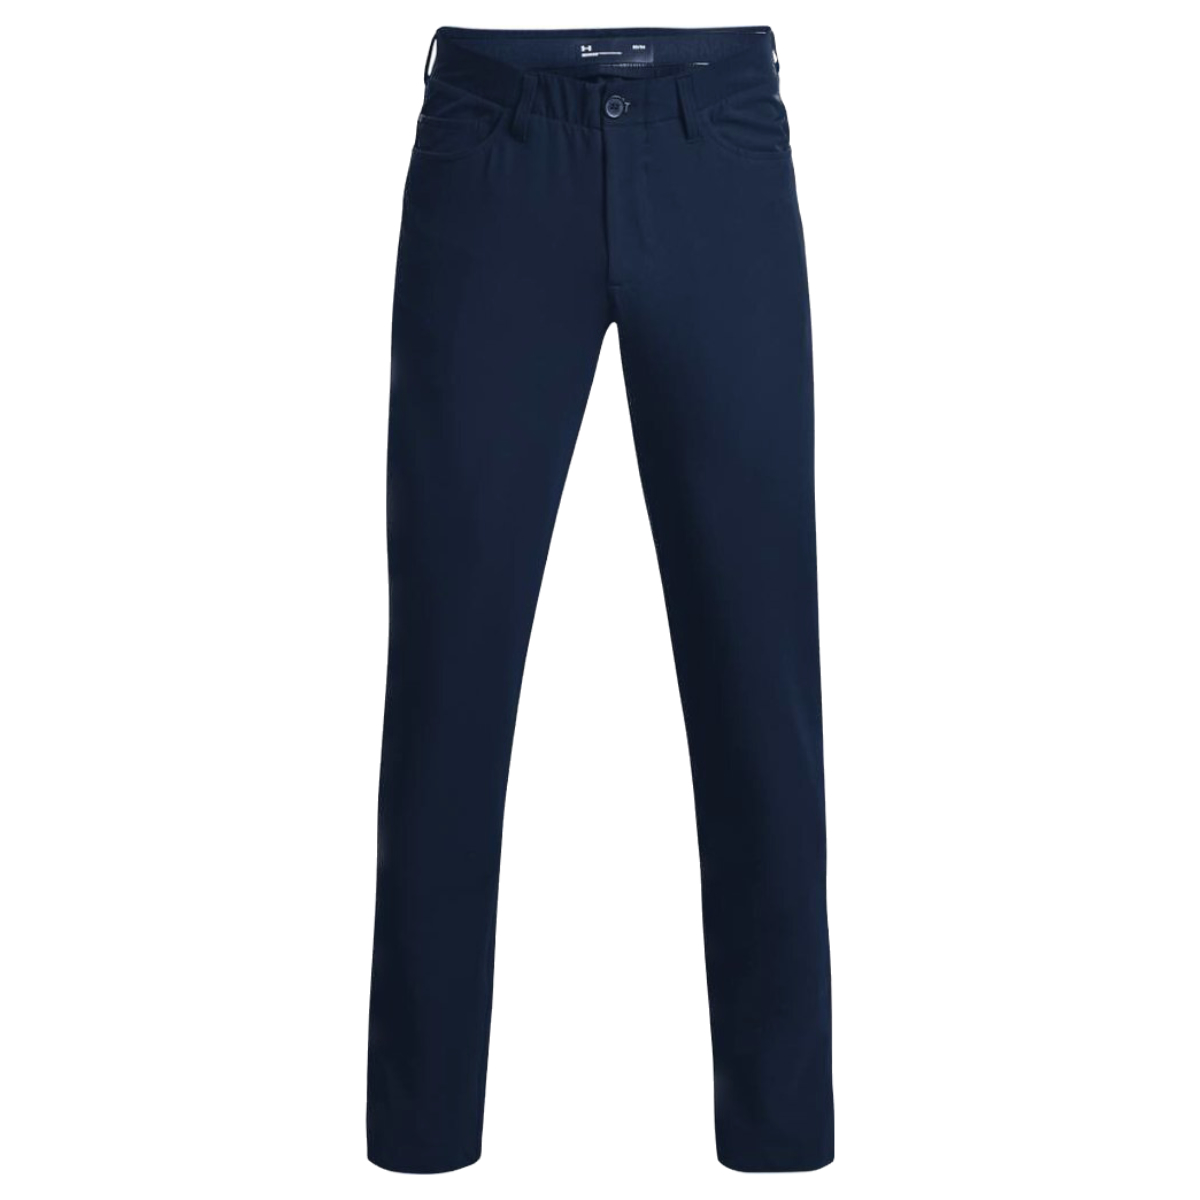 Under Armour Drive 5 Pocket Pant Navy